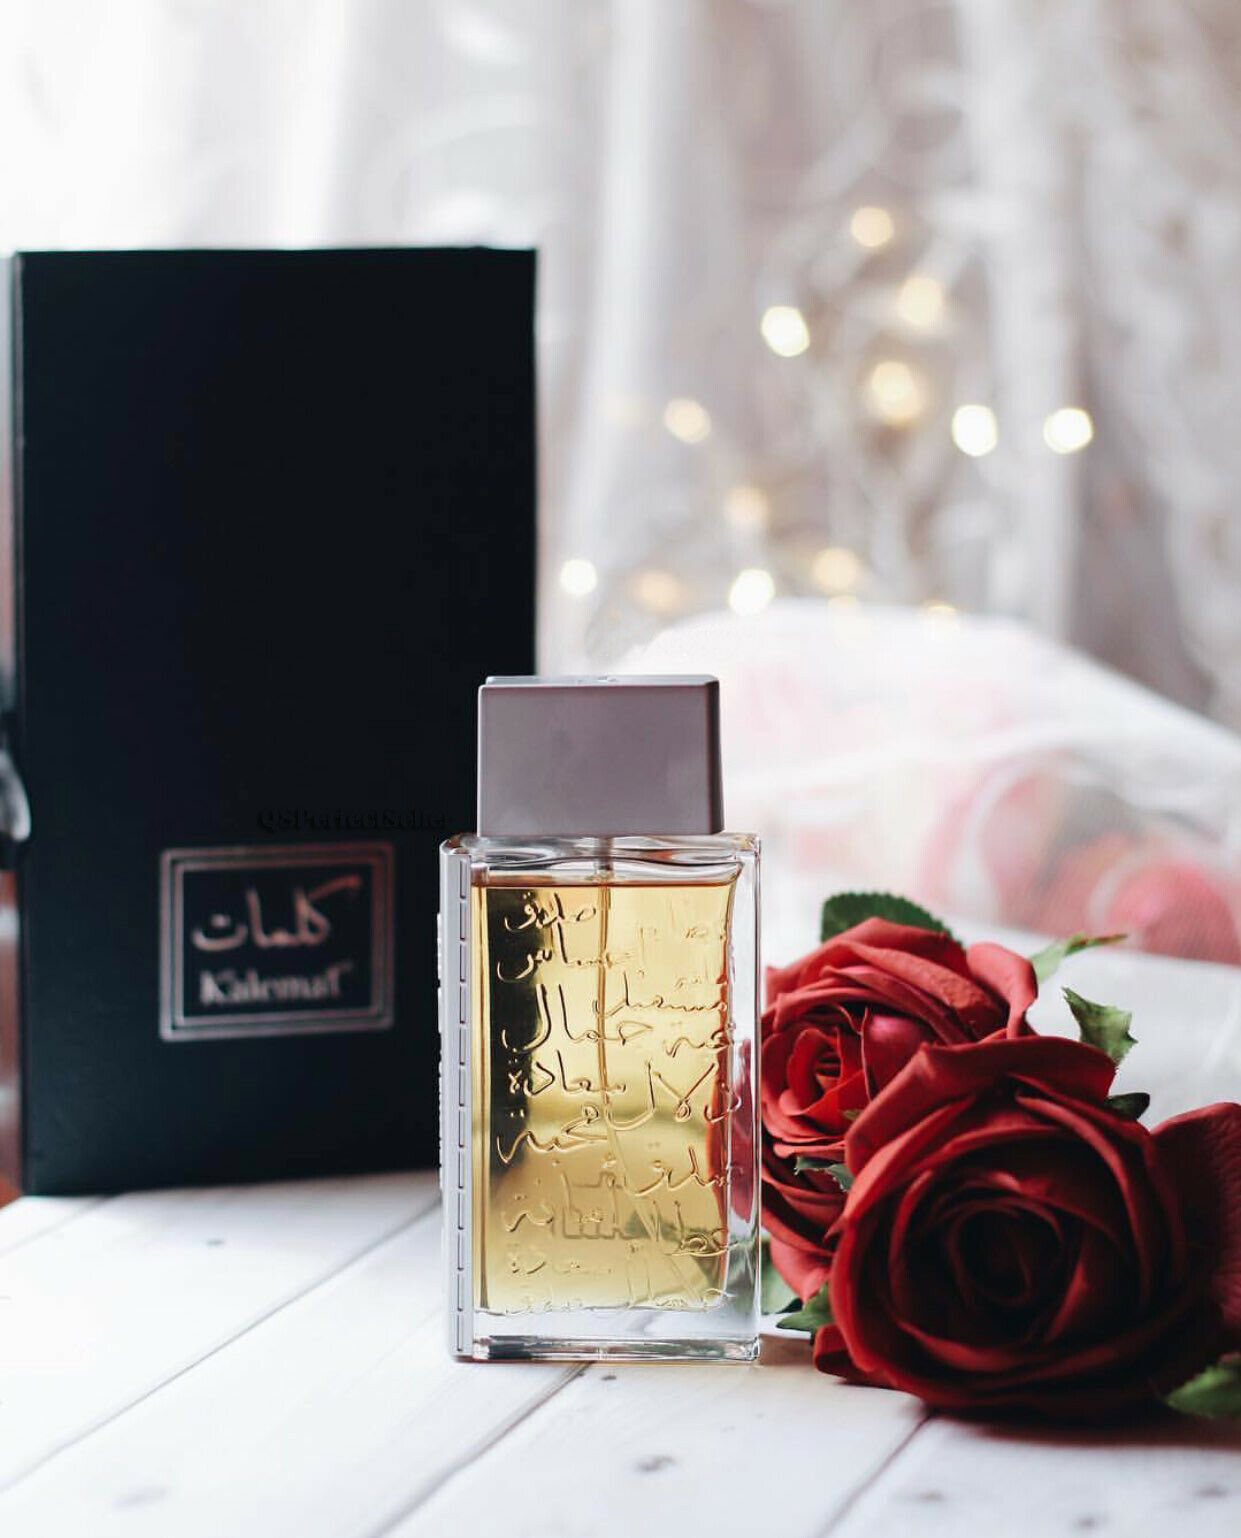 Primary image for Sehr Al Kalemat (Black) by Arabian Oud 100ml Spray -Free Express Shipping SEALED